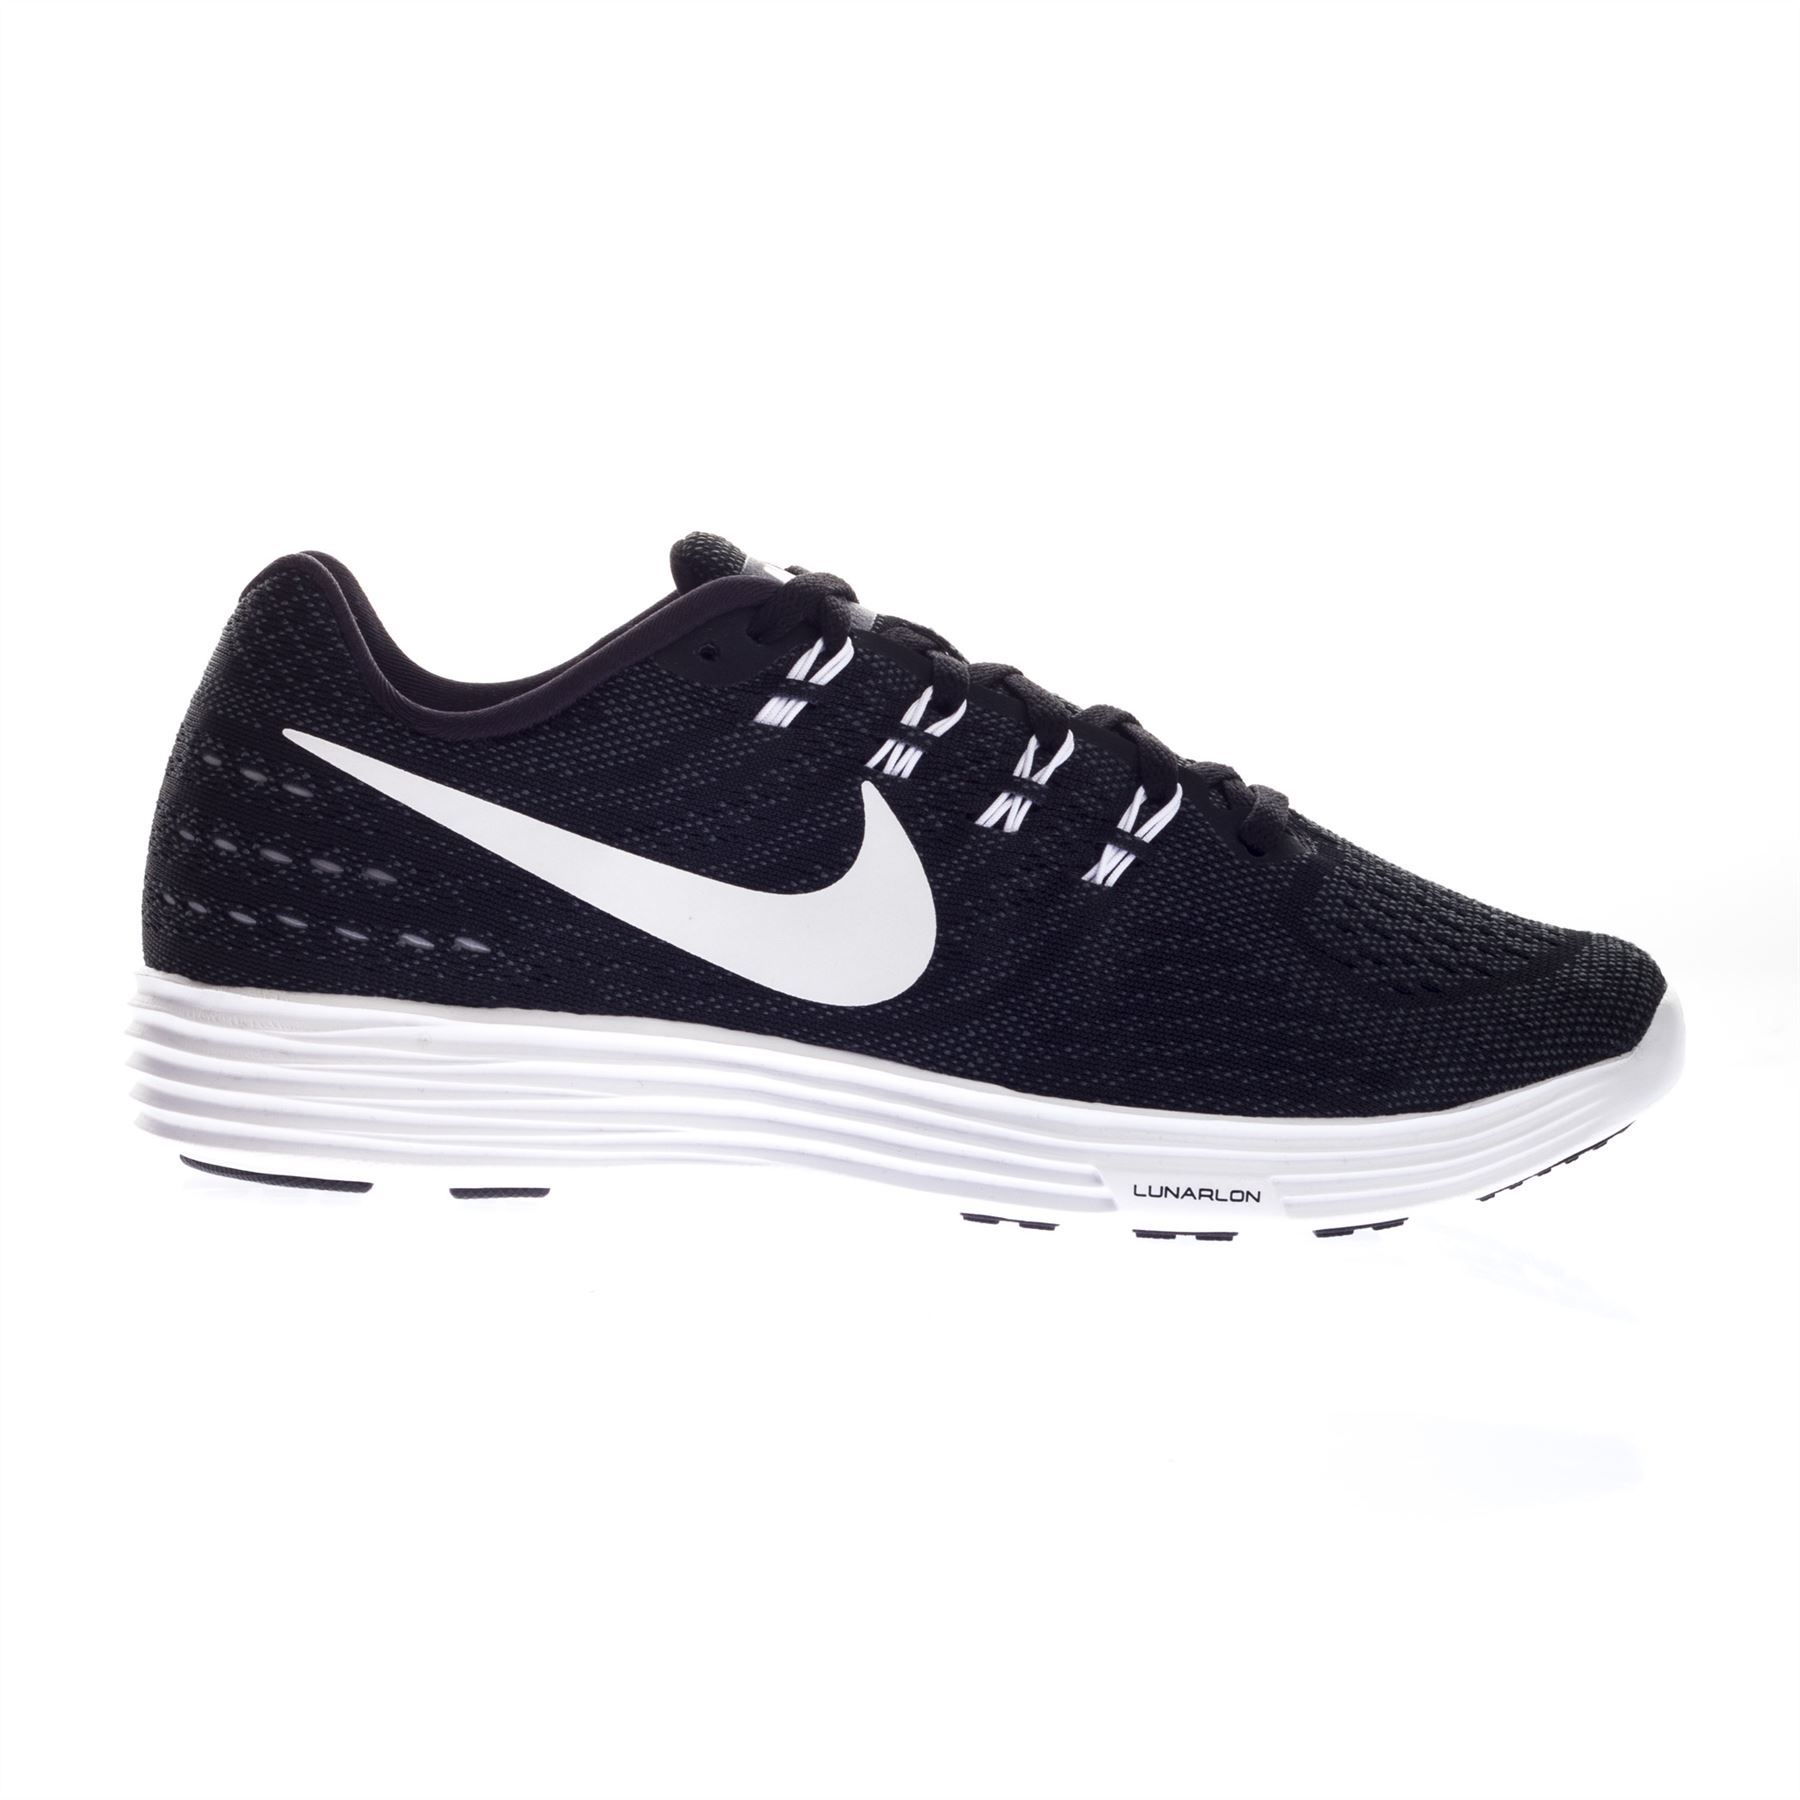 Nike Men's Lunartempo 2 Low Top Gym Running Trainers | eBay